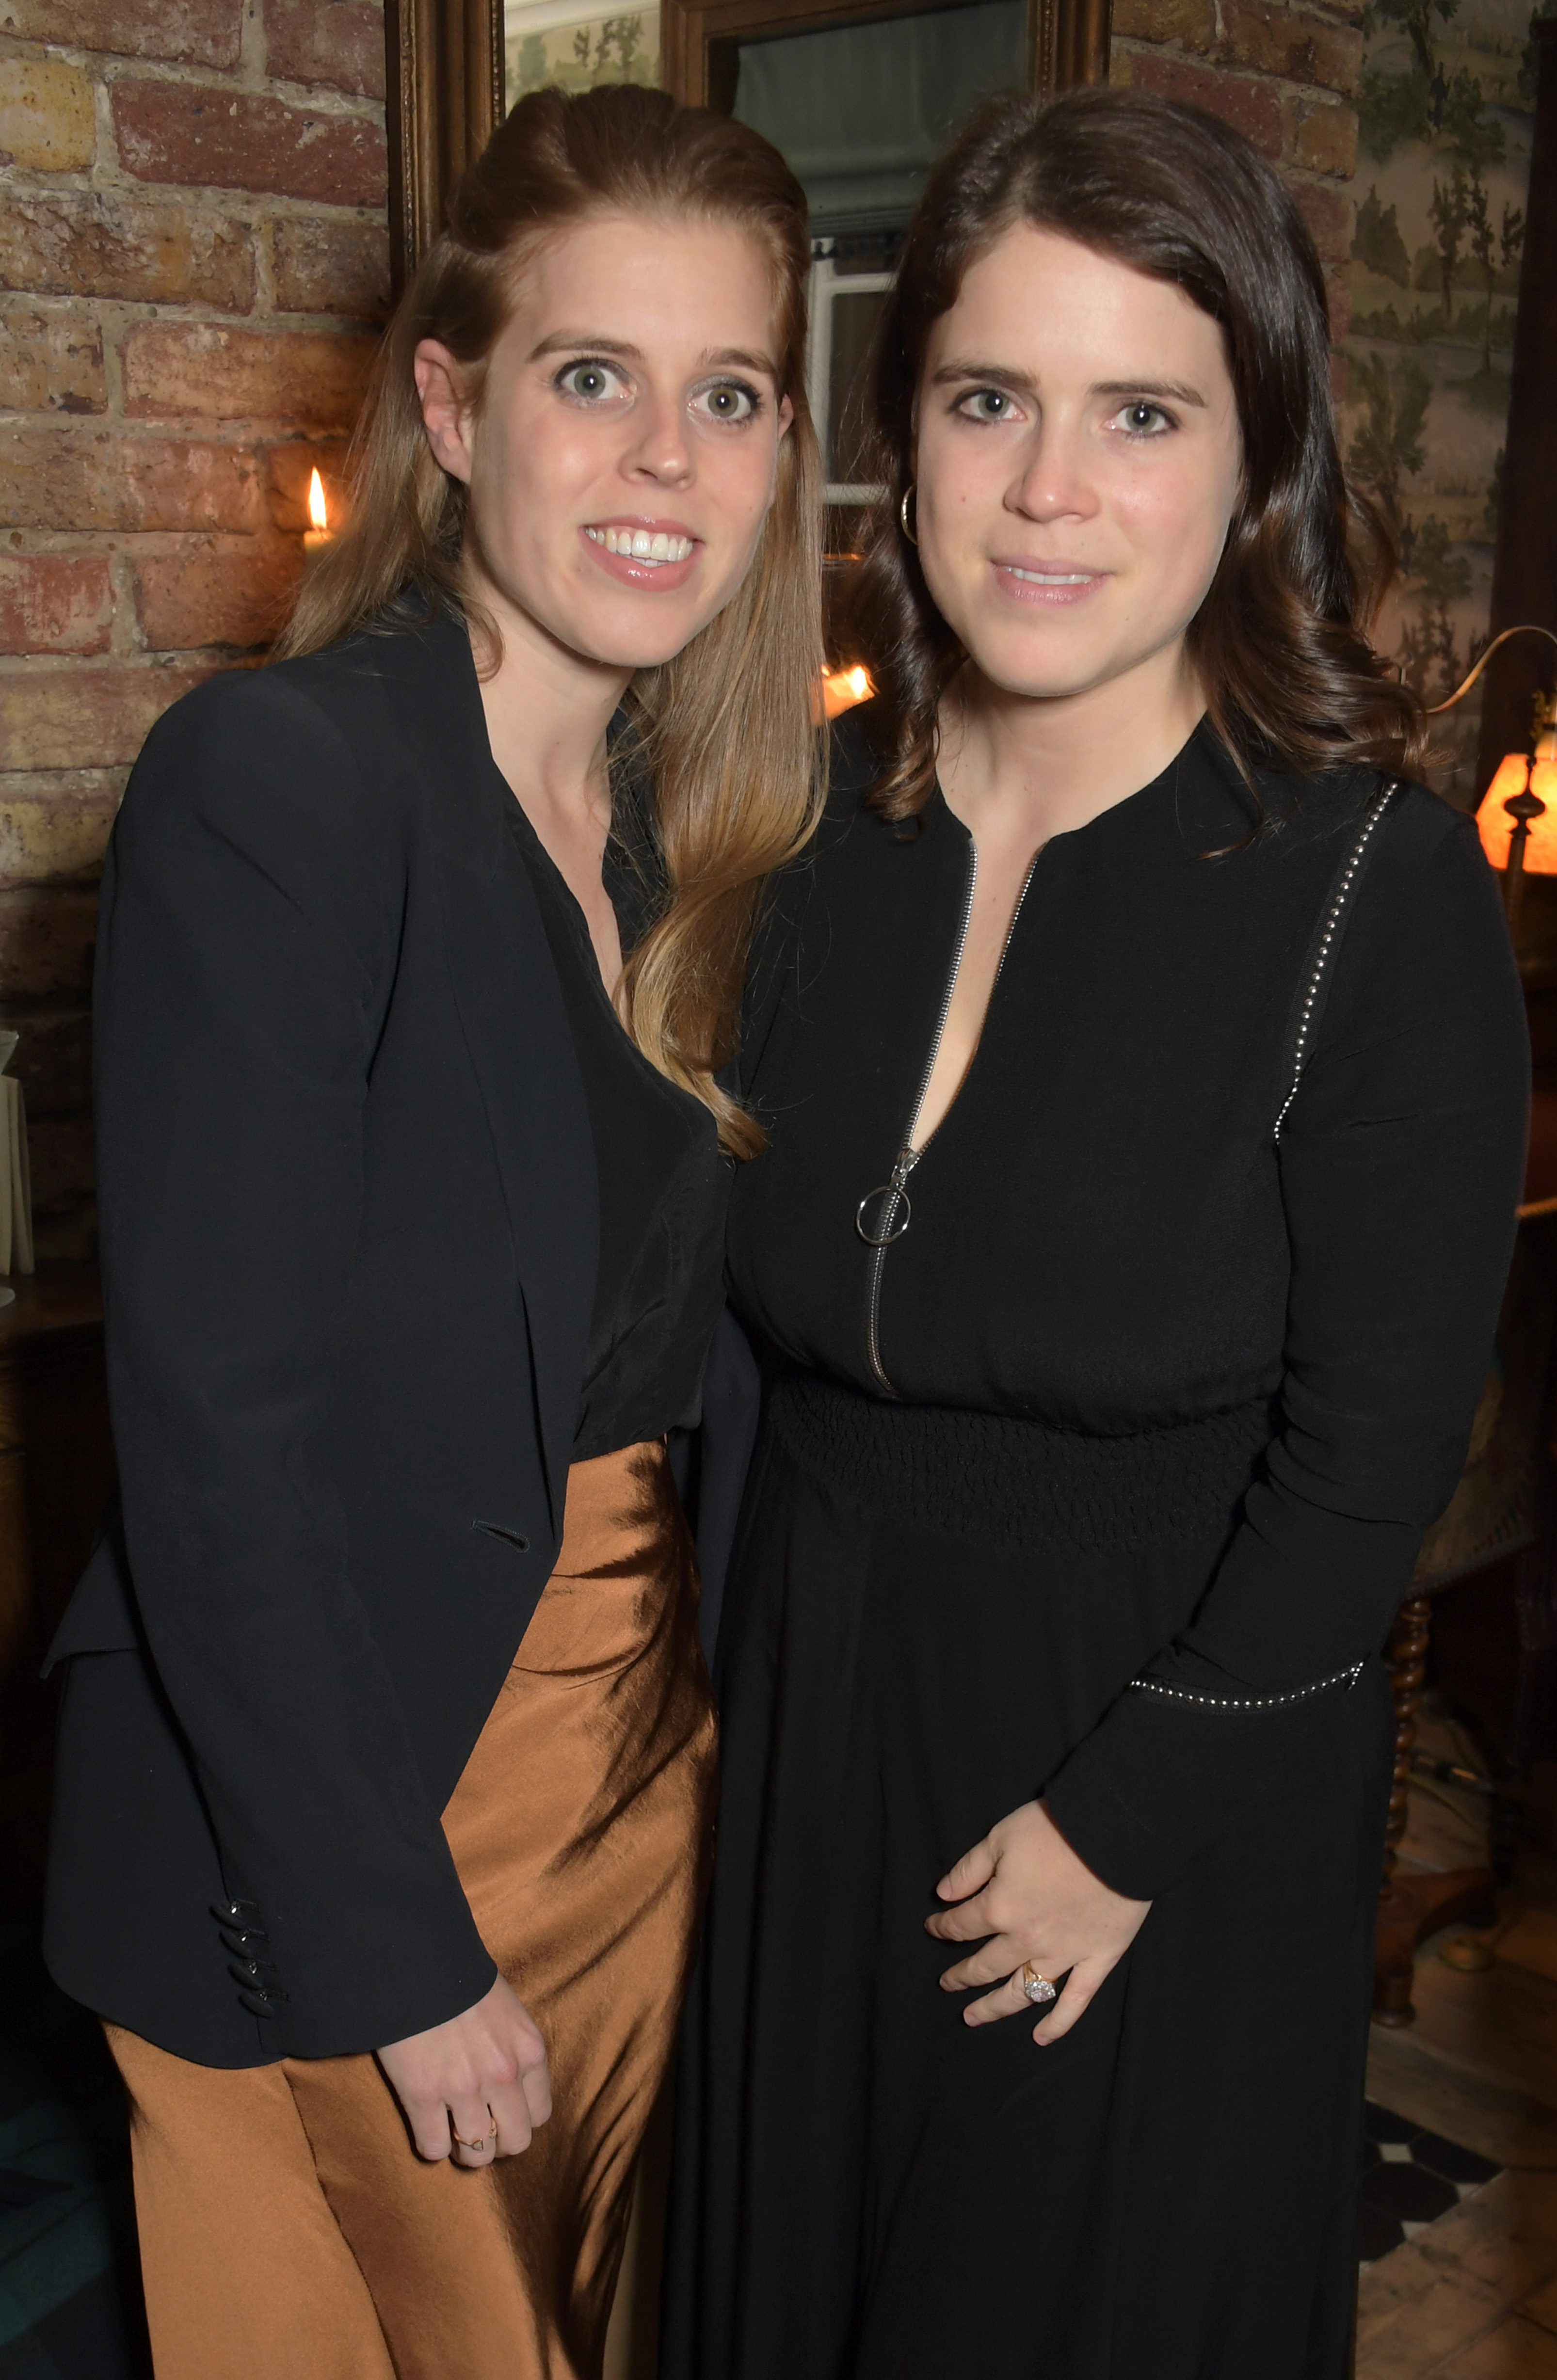 Princess Beatrice and Princess Eugenie pose for a photo together at a dinner party in London